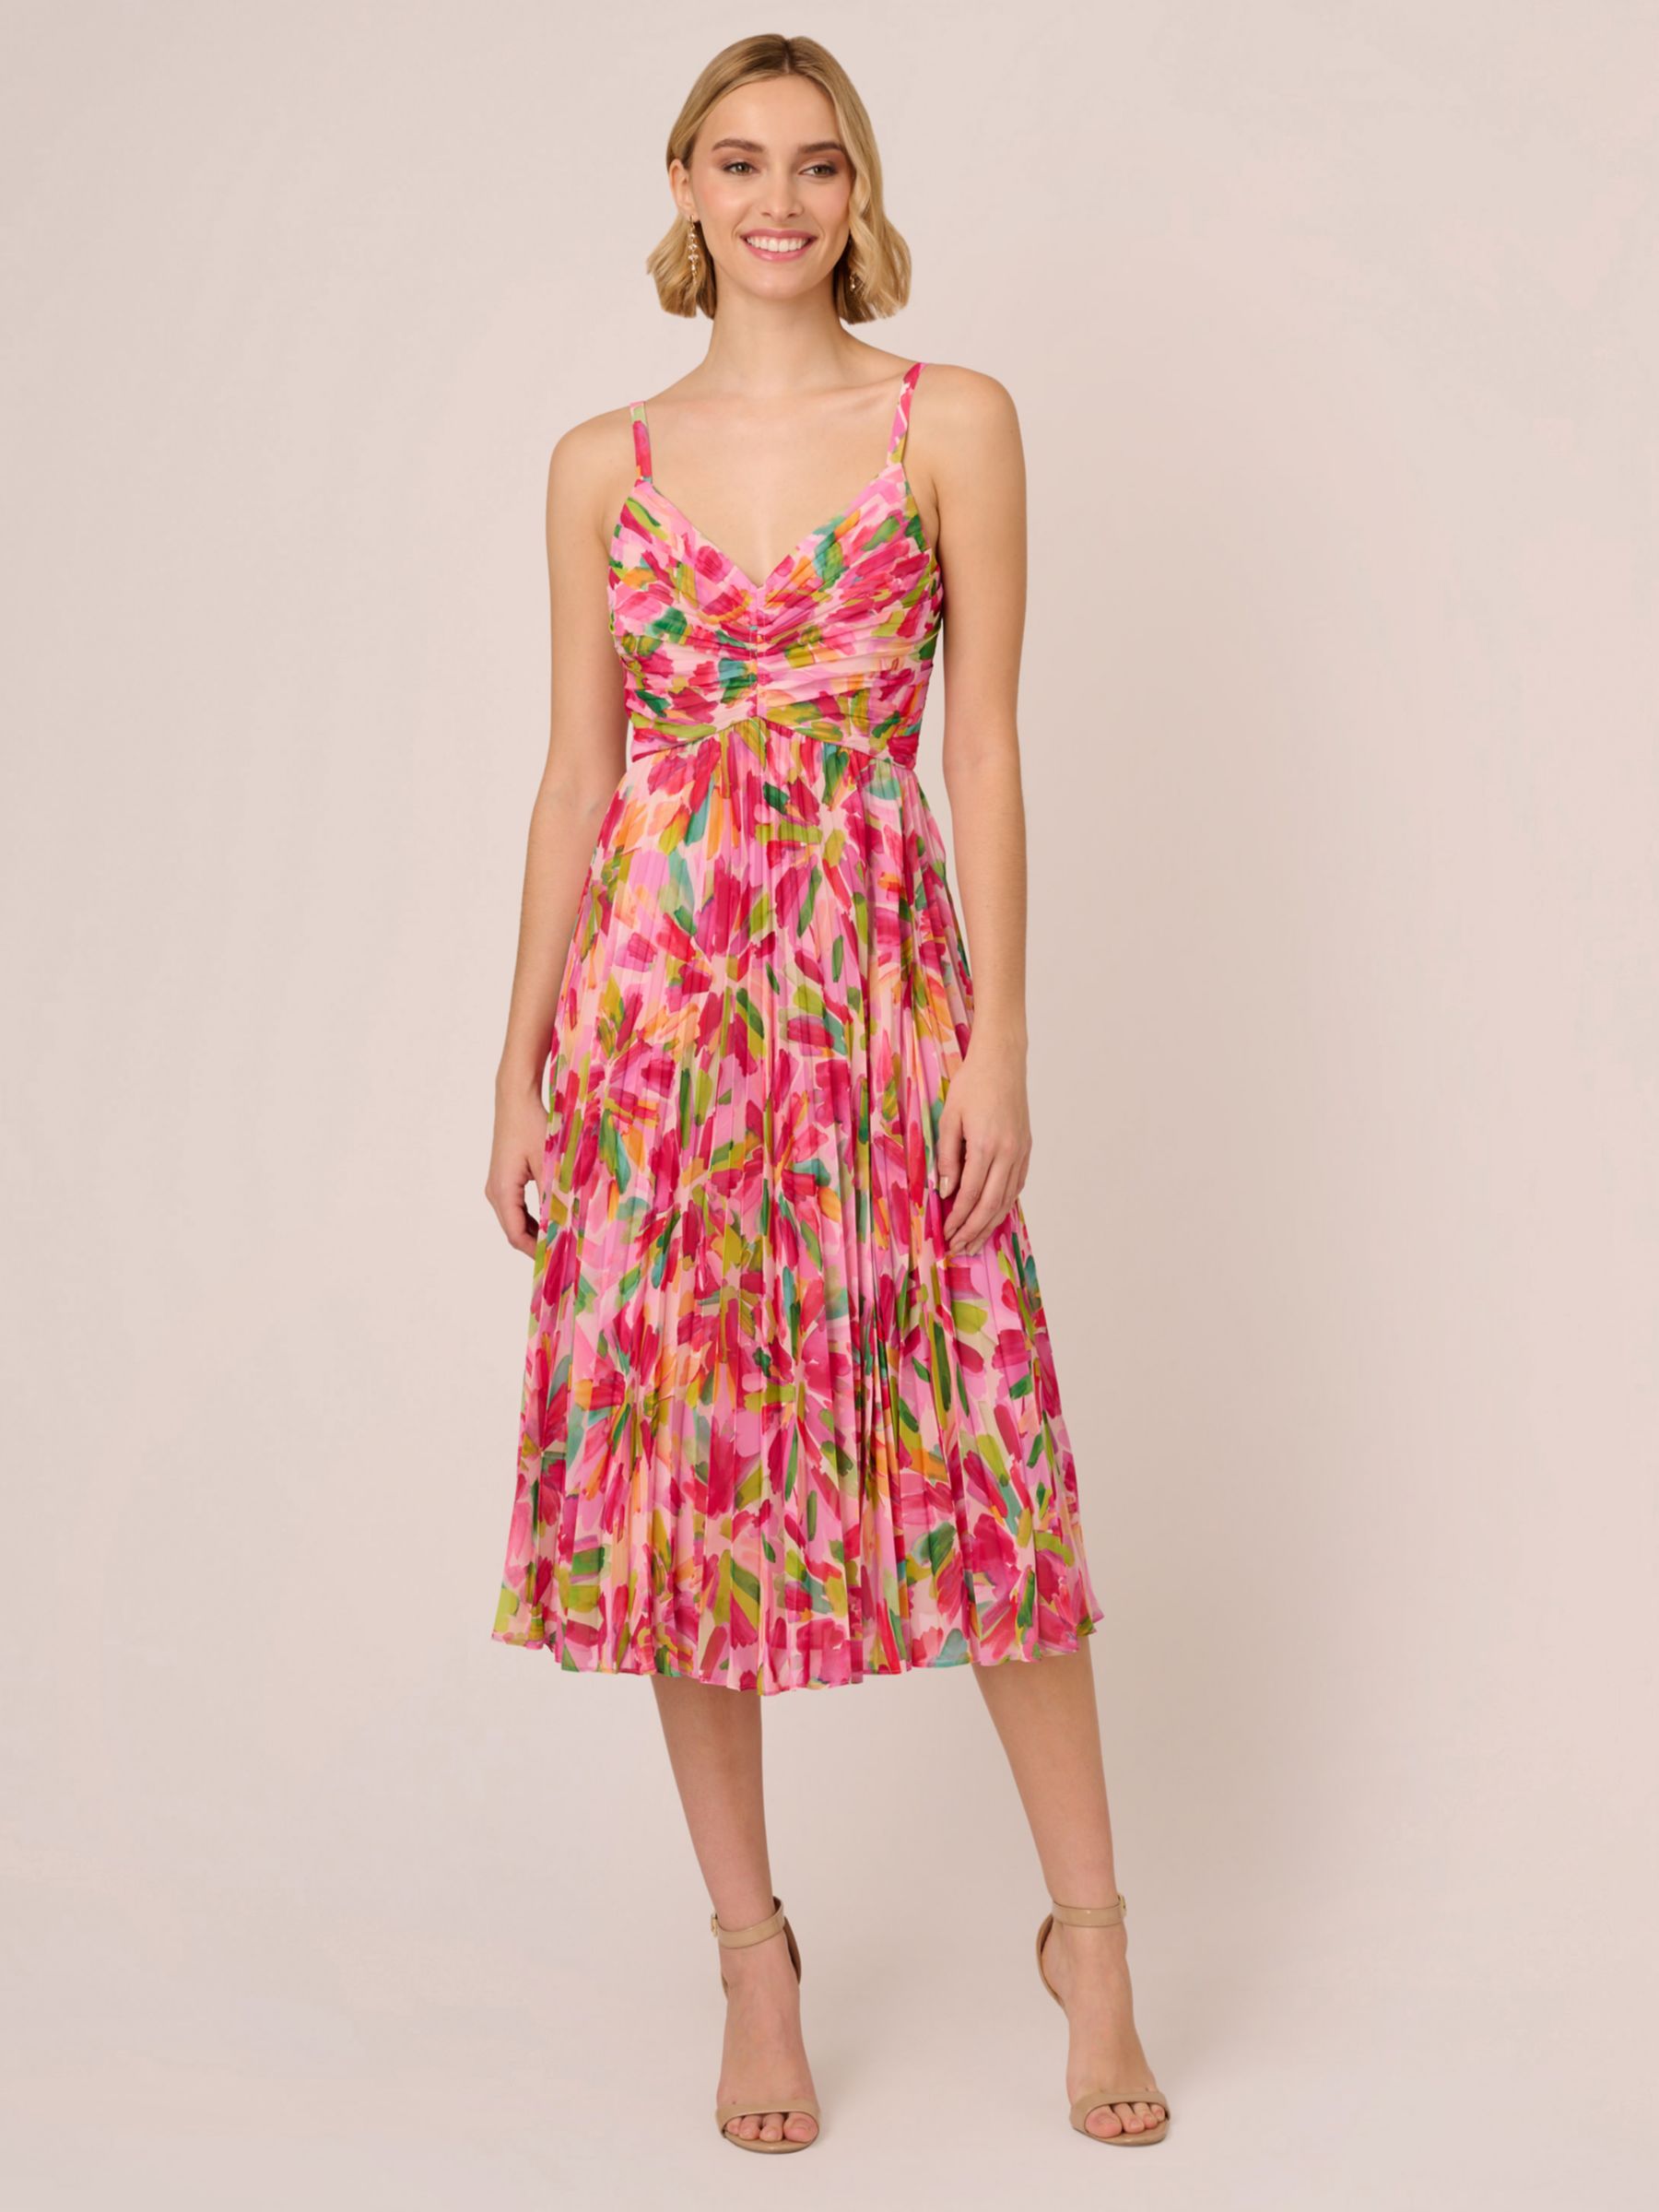 Adrianna Papell Dresses | John Lewis & Partners - Page 2